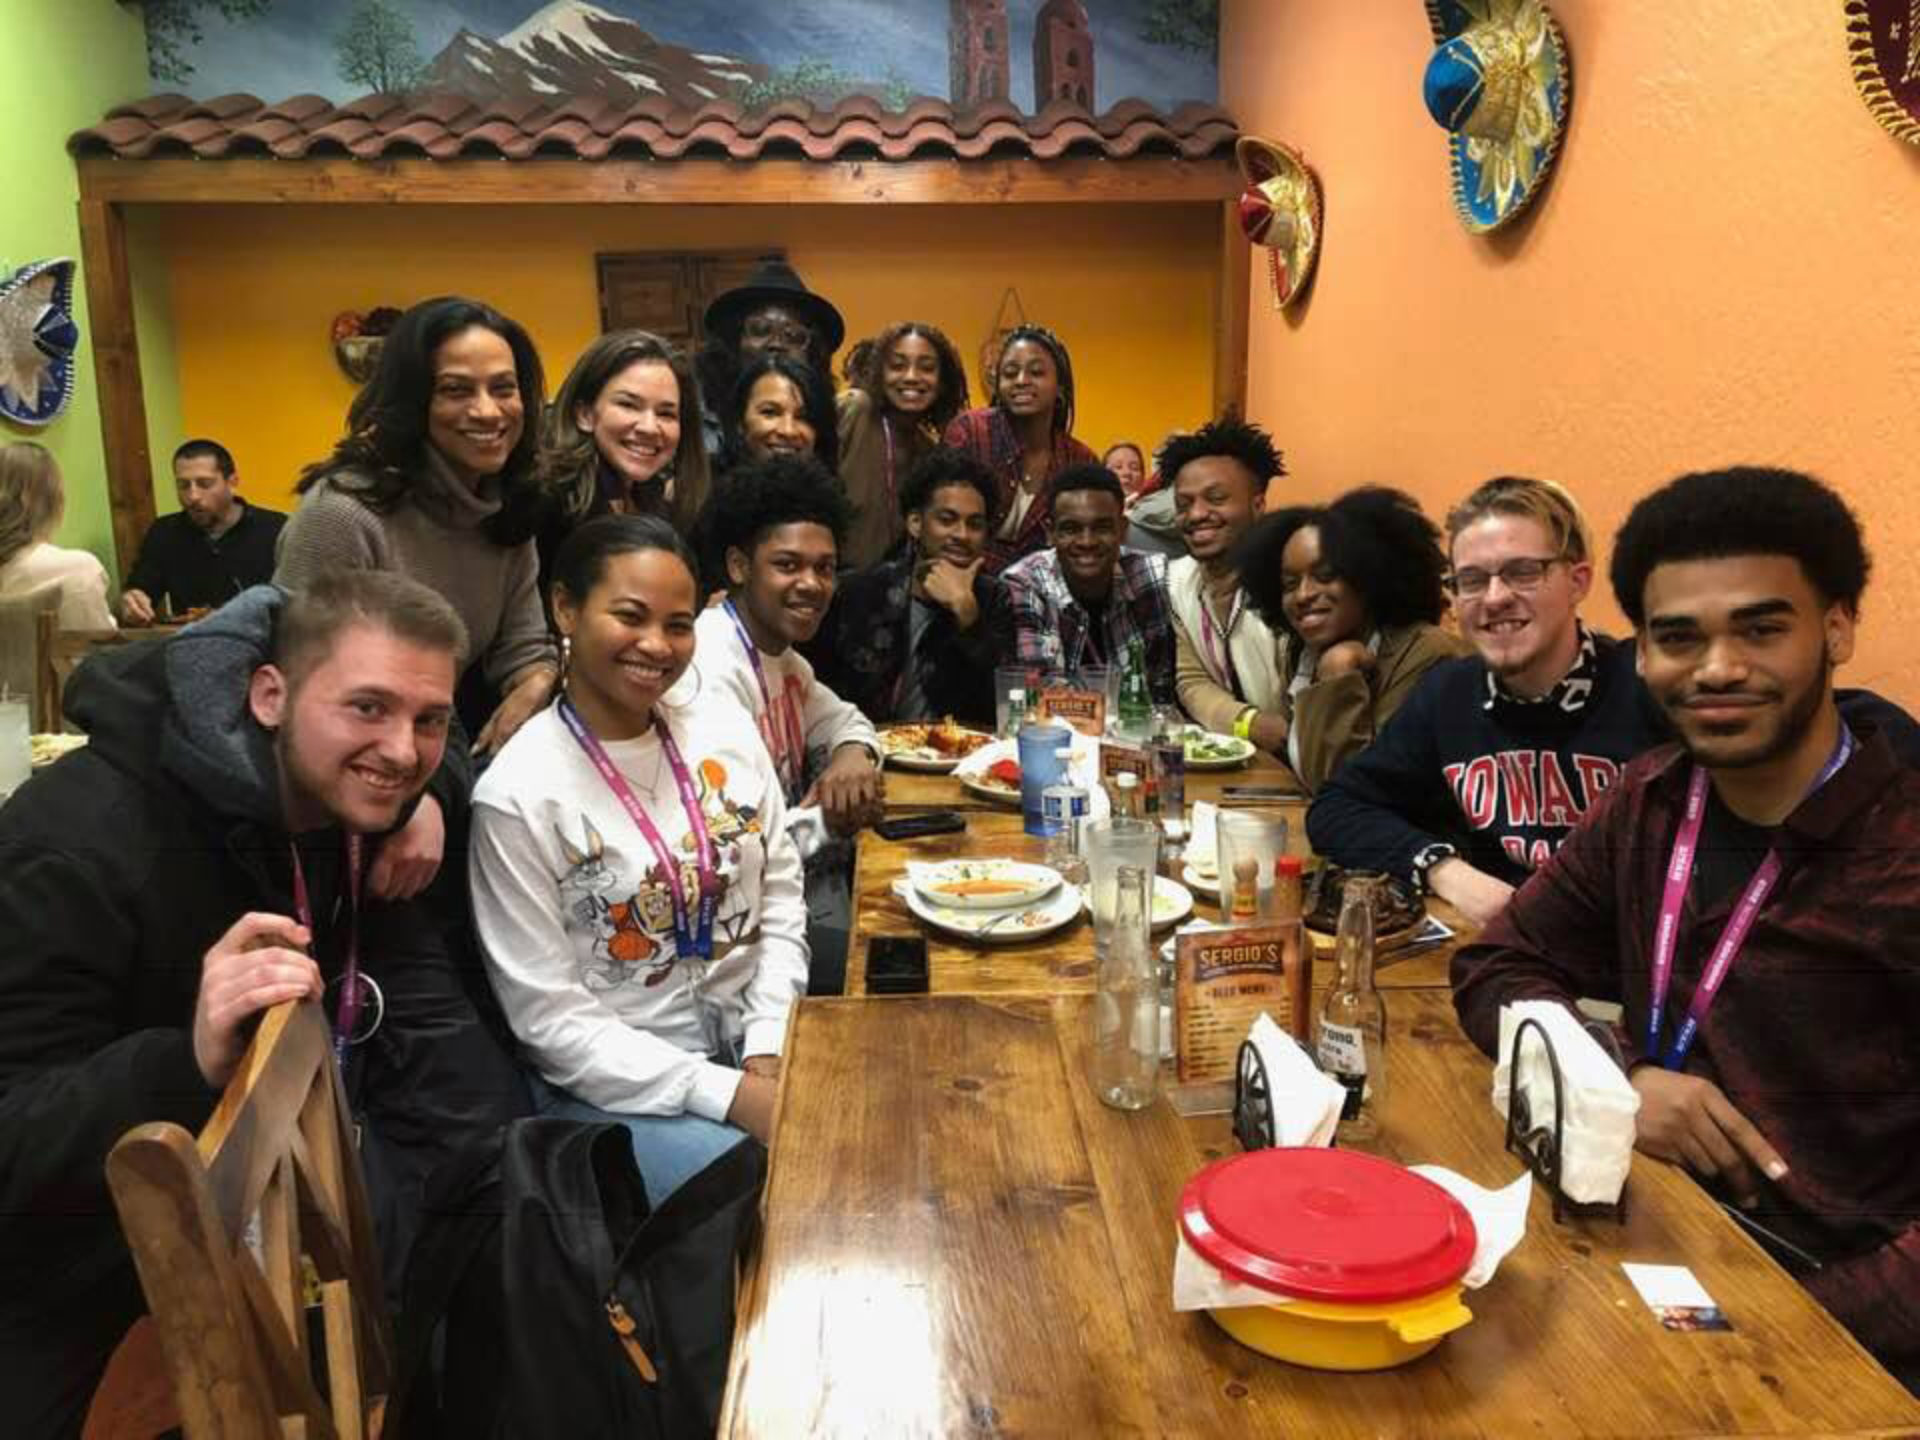 Howard University hopeful apprentices are gathered around a table at a Mexican restaurant smiling.